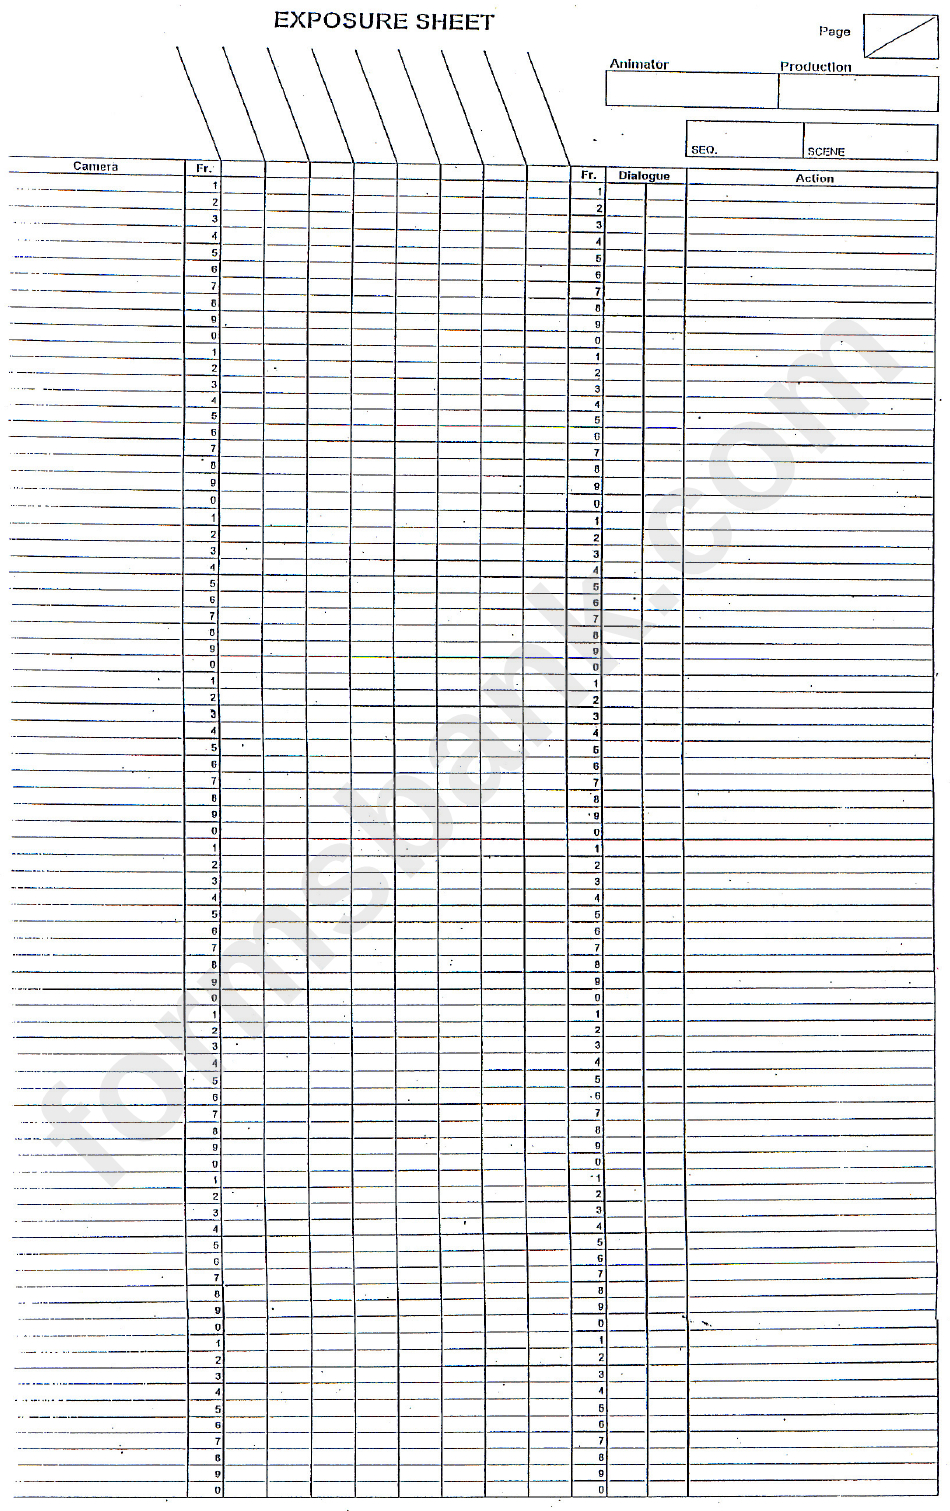 Blank Exposure Sheet Template Printable Pdf Download-Blank Il W 9 Form 2021 Printable